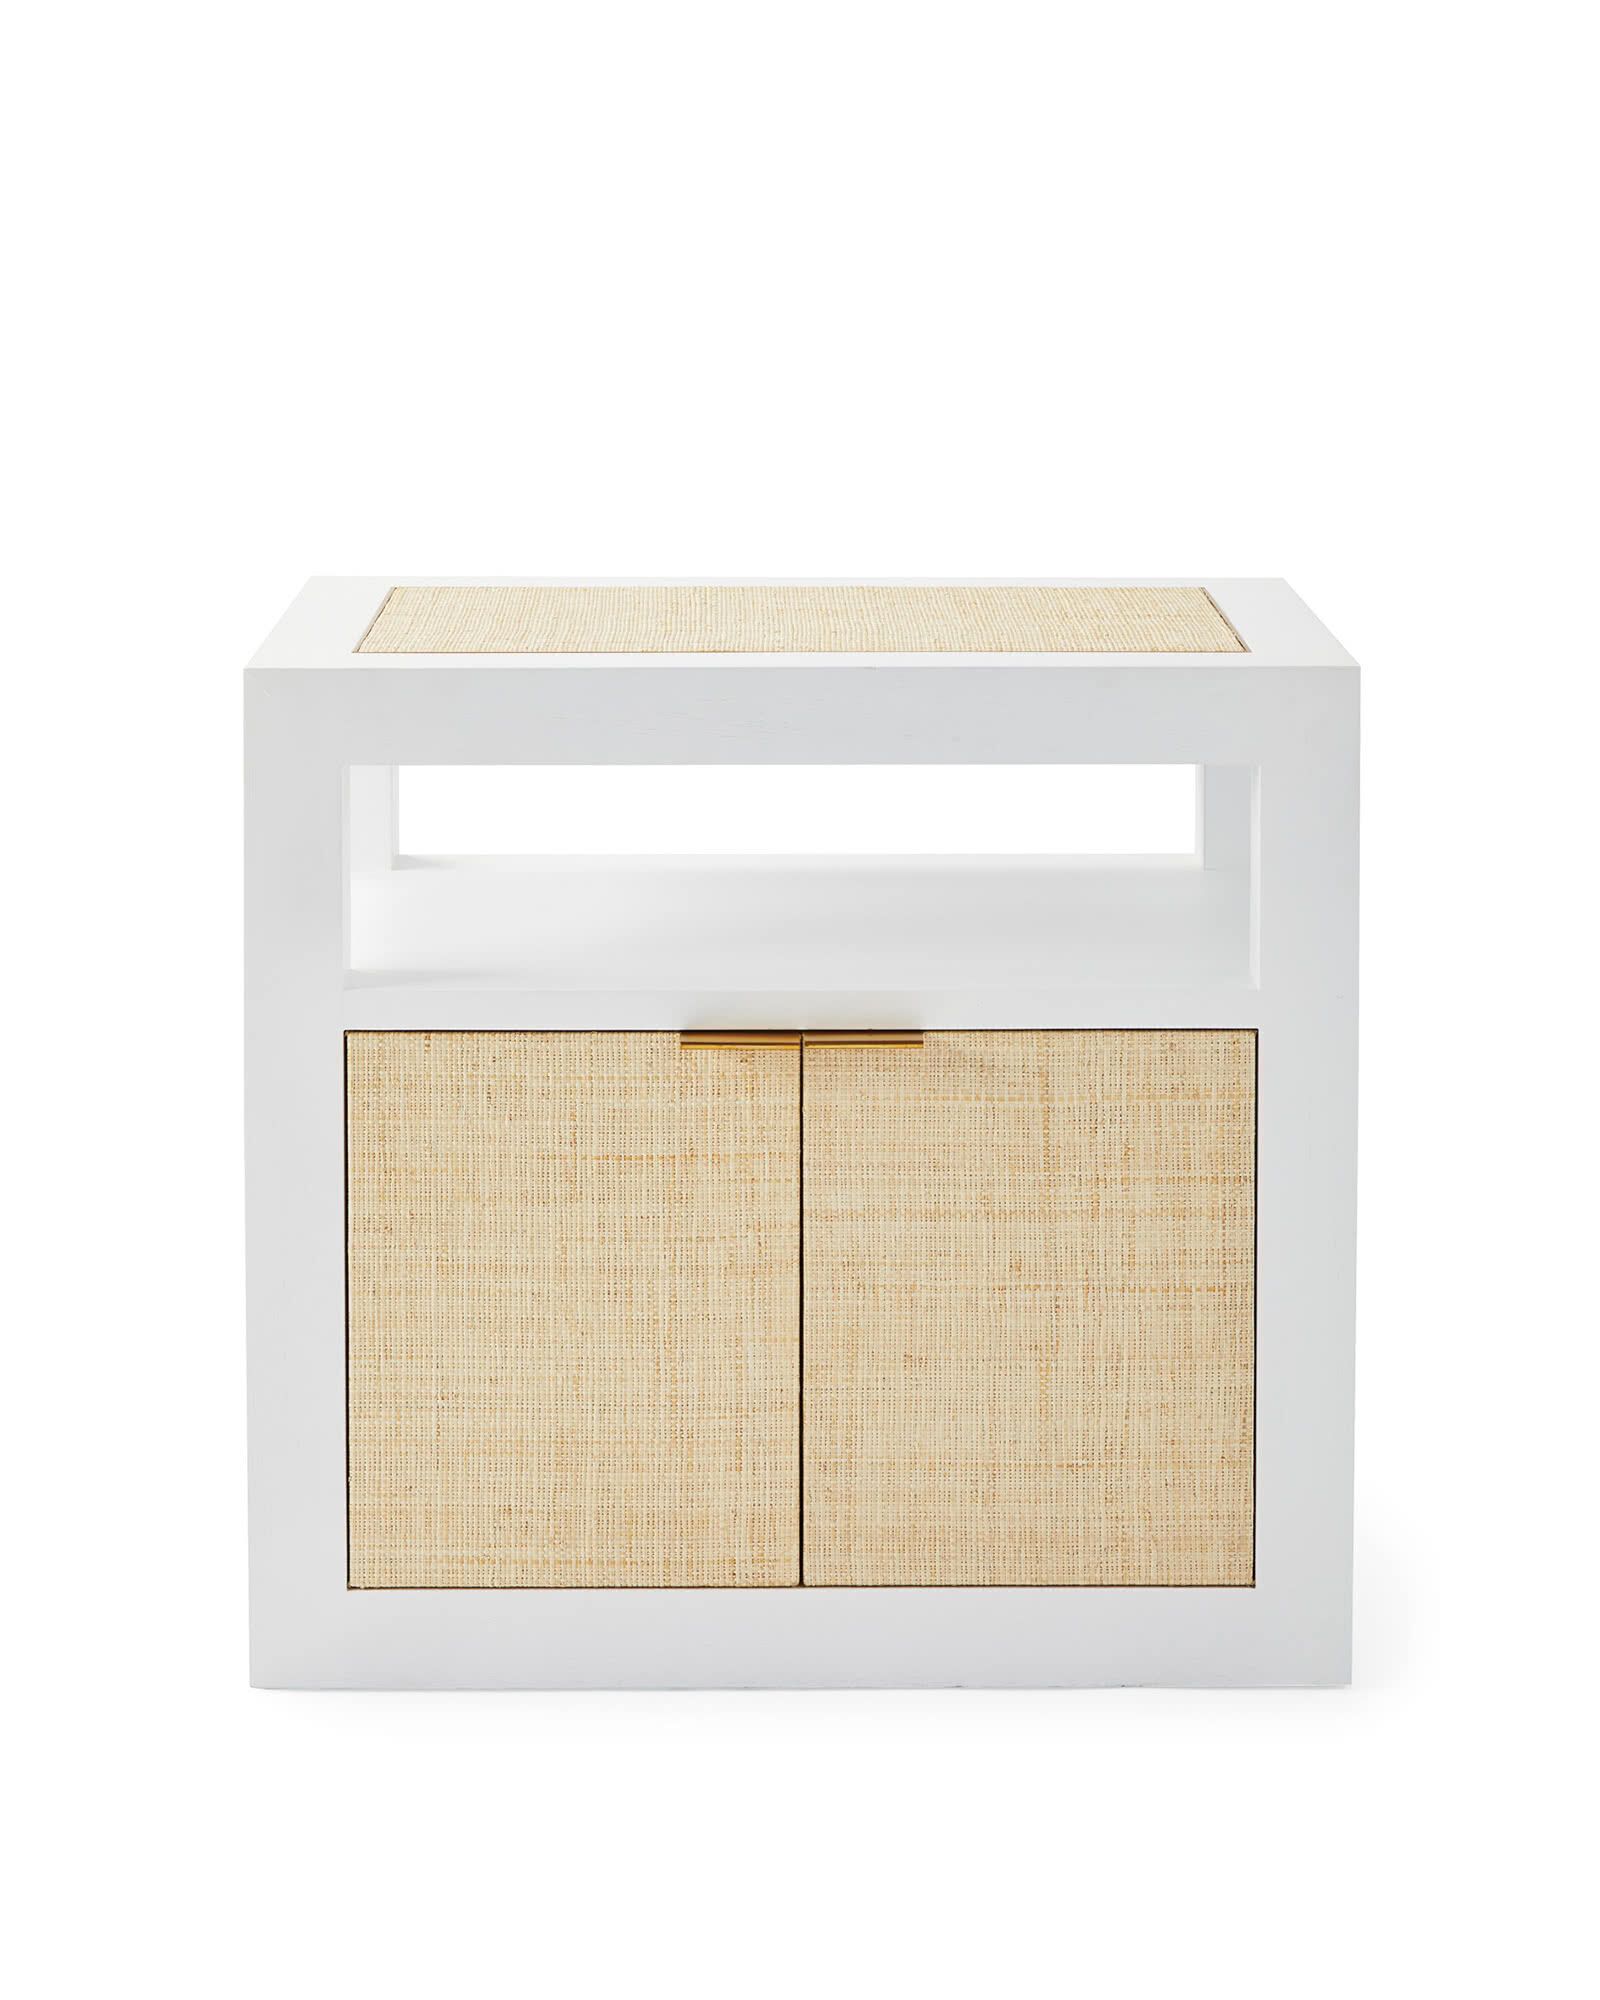 Mercer Nightstand | Serena and Lily